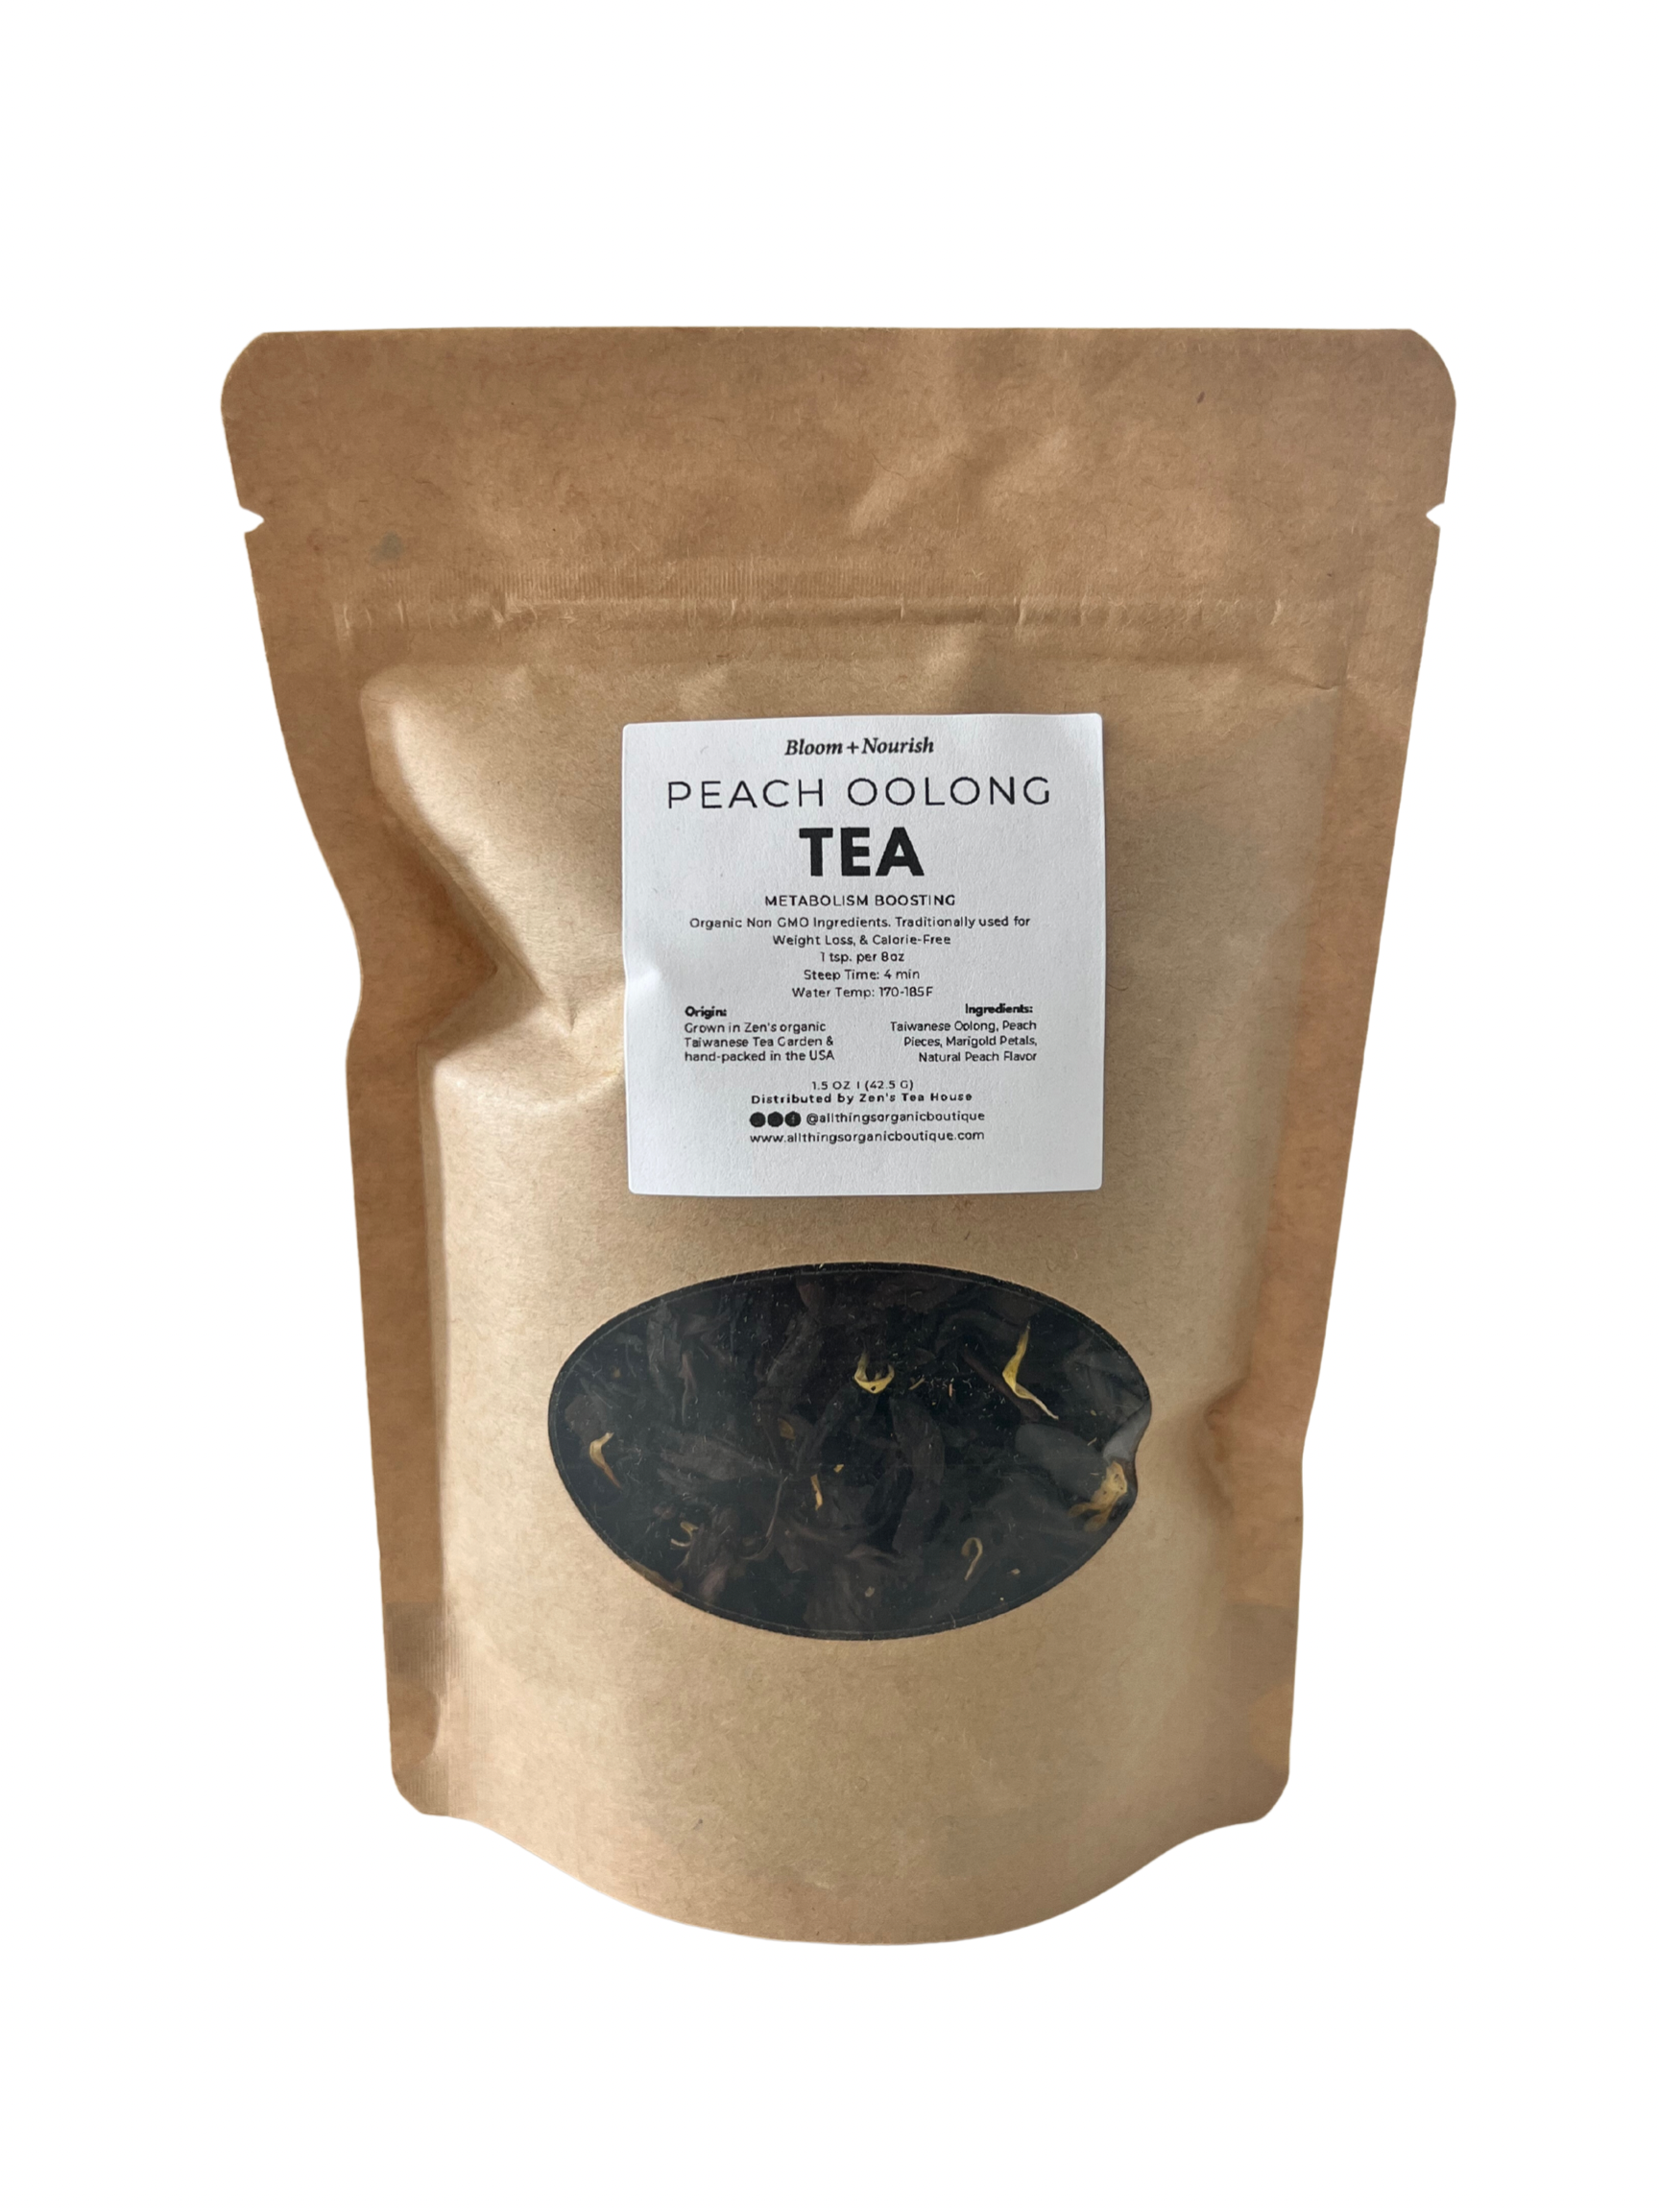 Peach Oolong is a metabolism boosting weight-loss tea  blended with potent Taiwanese Oolong leaves